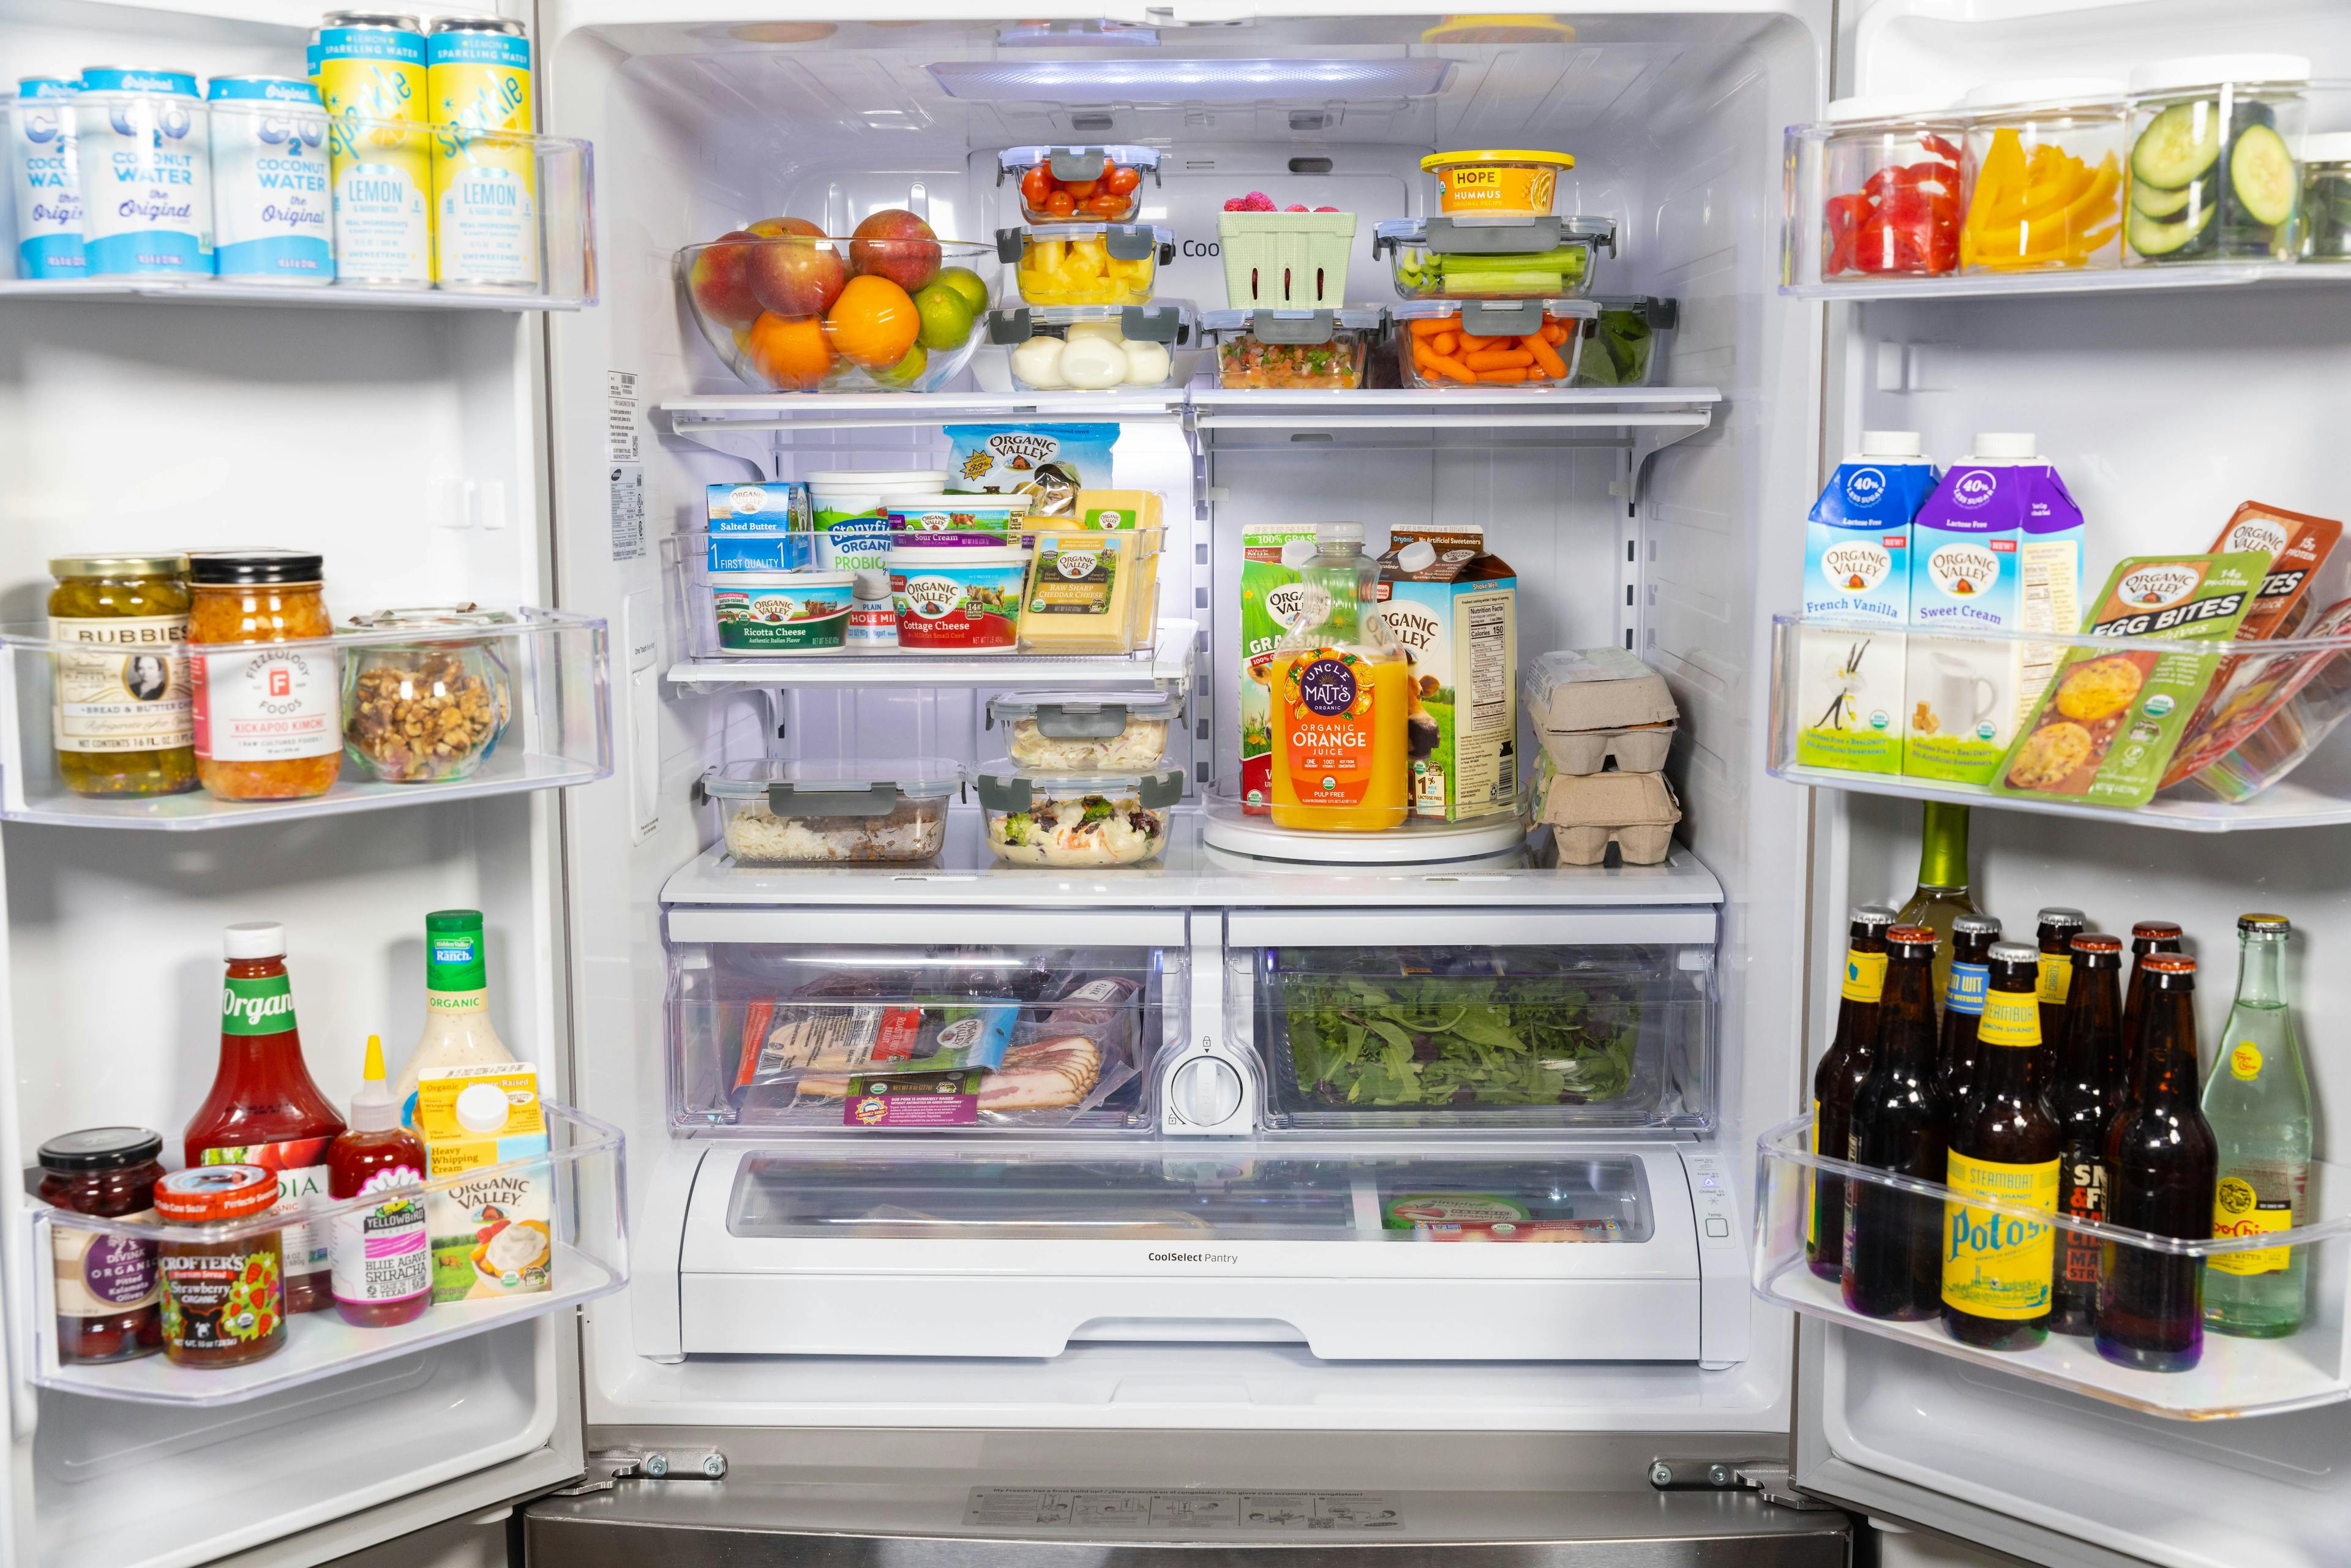 How to Organize Your Refrigerator and Store Food the Correct Way